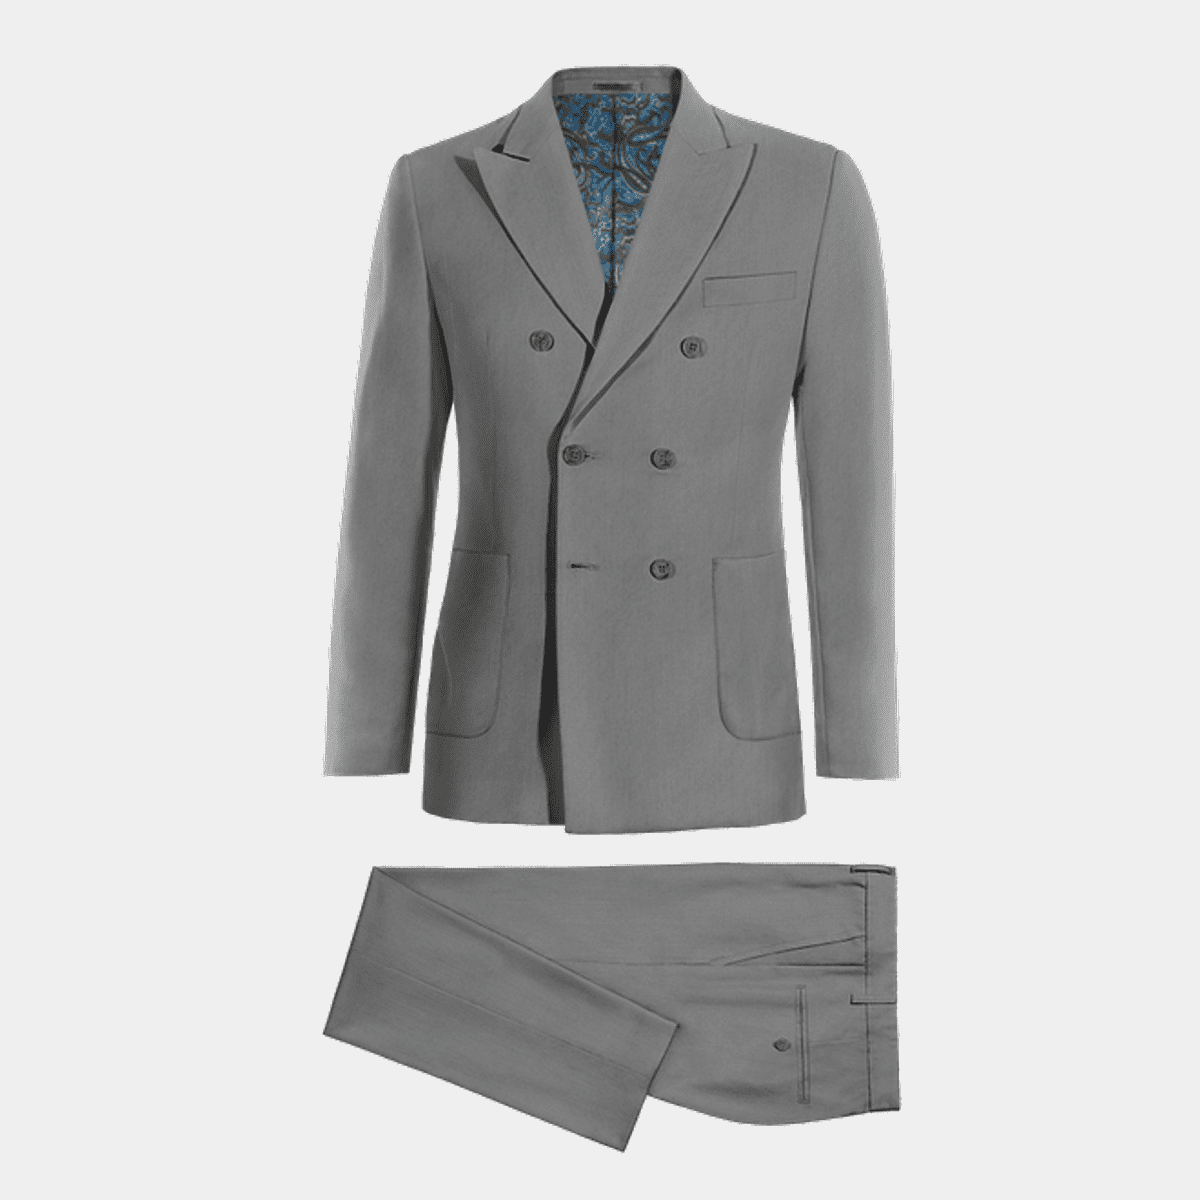 Grey double-breasted wide lapel Suit